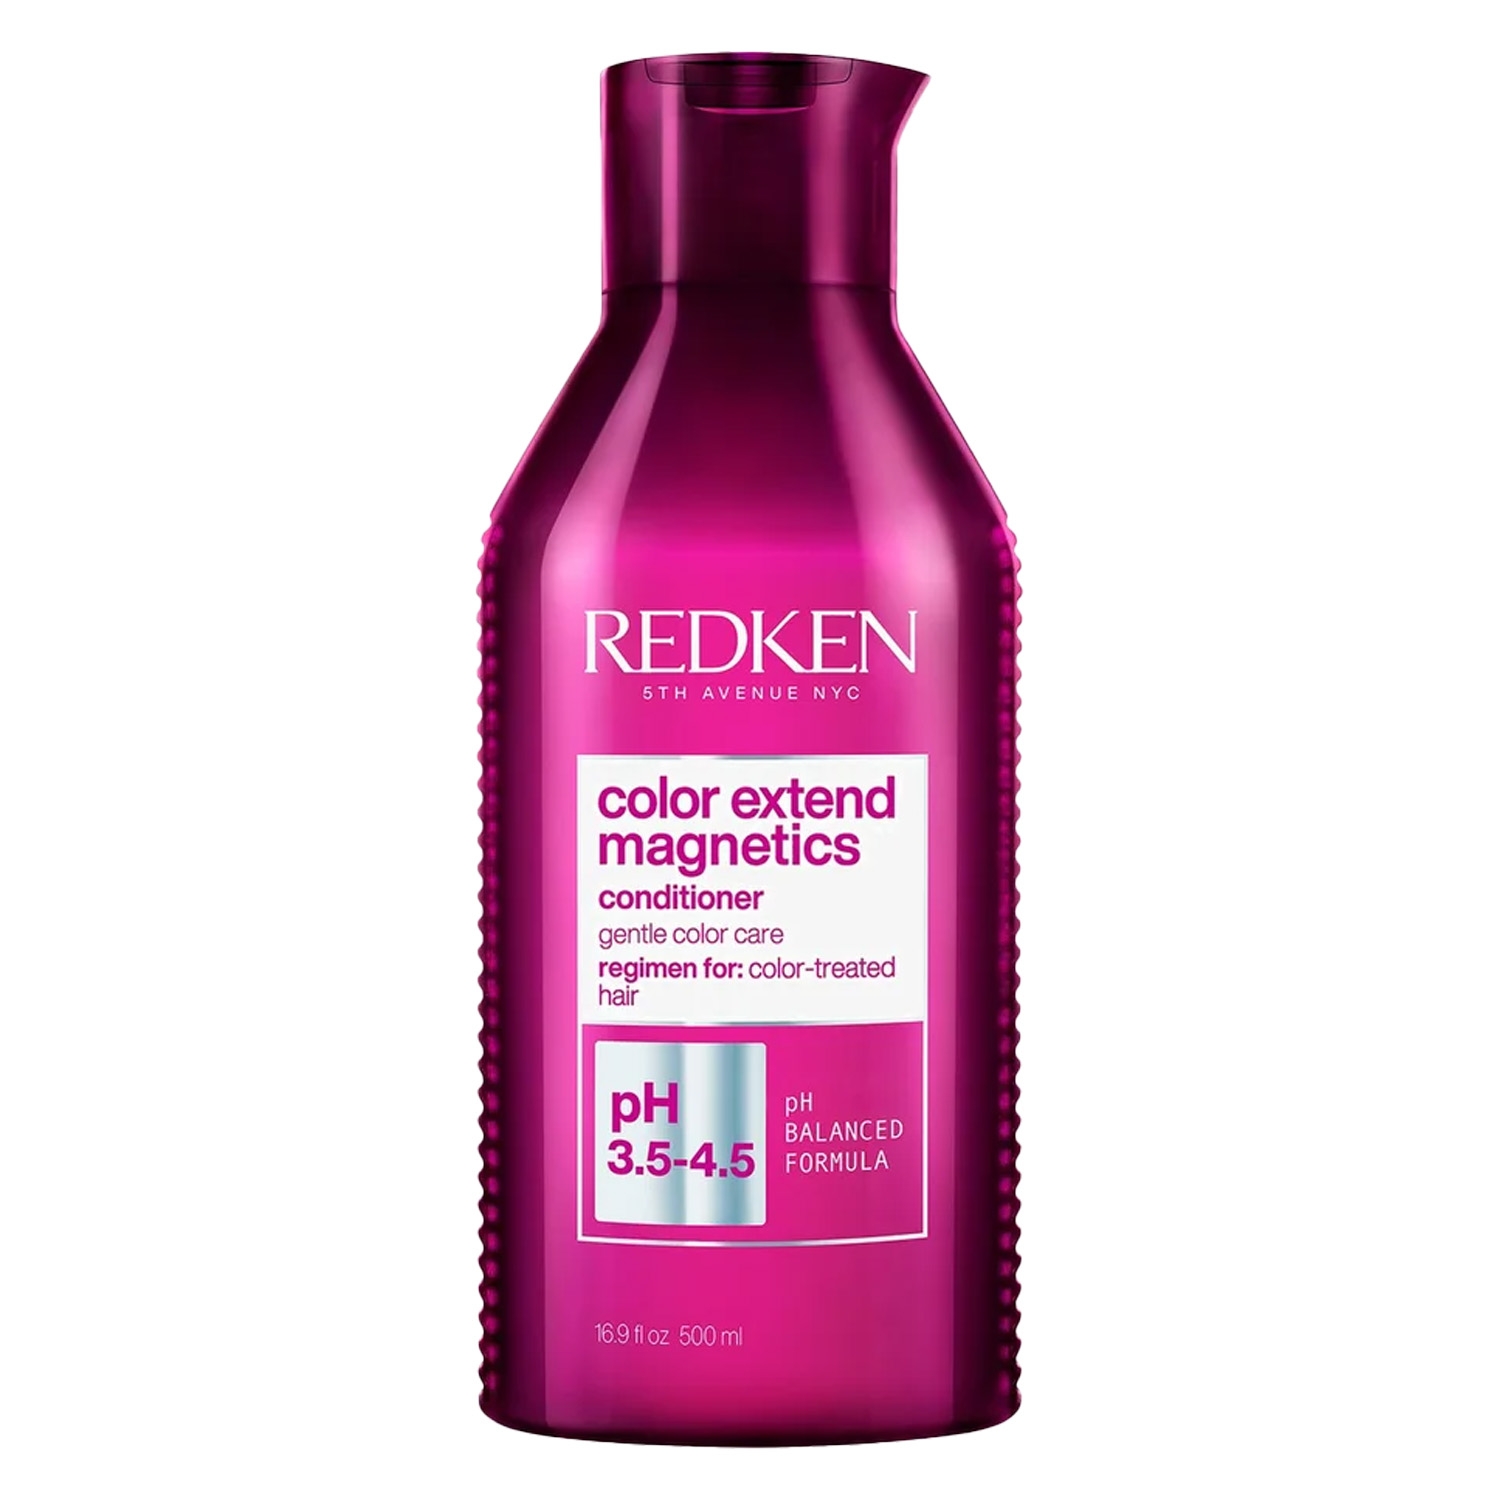 Product image from Color Extend Magnetics - Gentle Color Care Conditioner